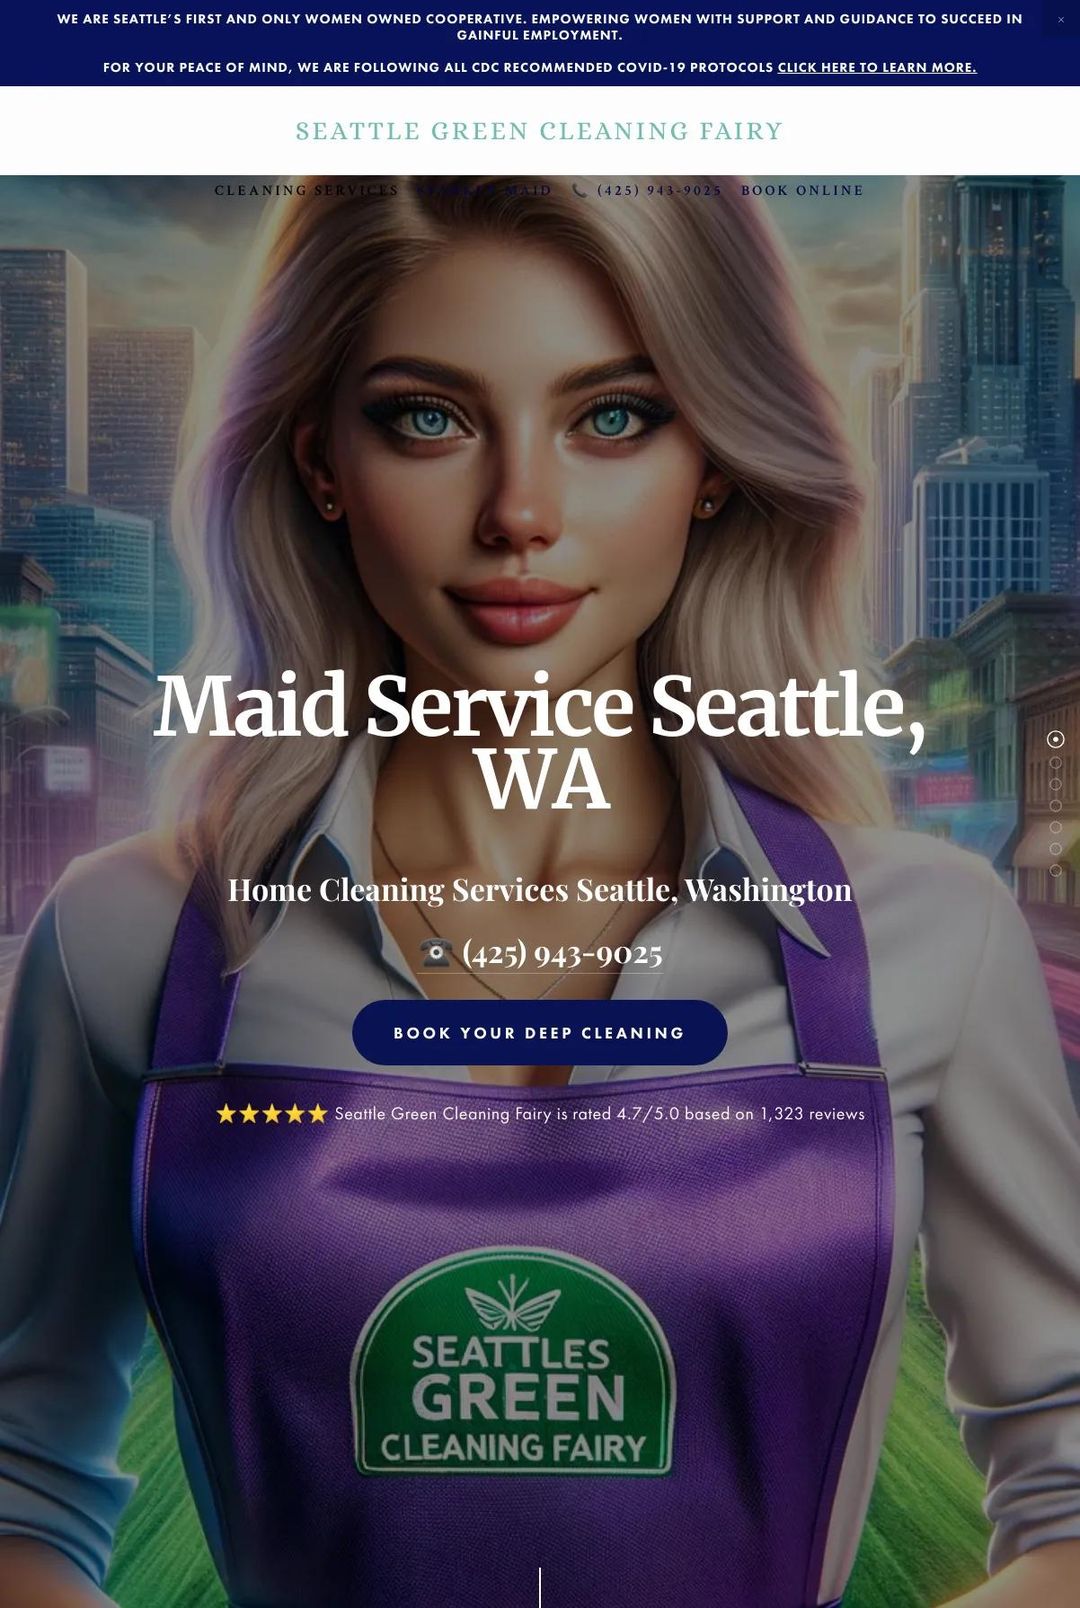 Screenshot 1 of Seattle Green Cleaning Fairy (Example Squarespace Cleaning Services Website)